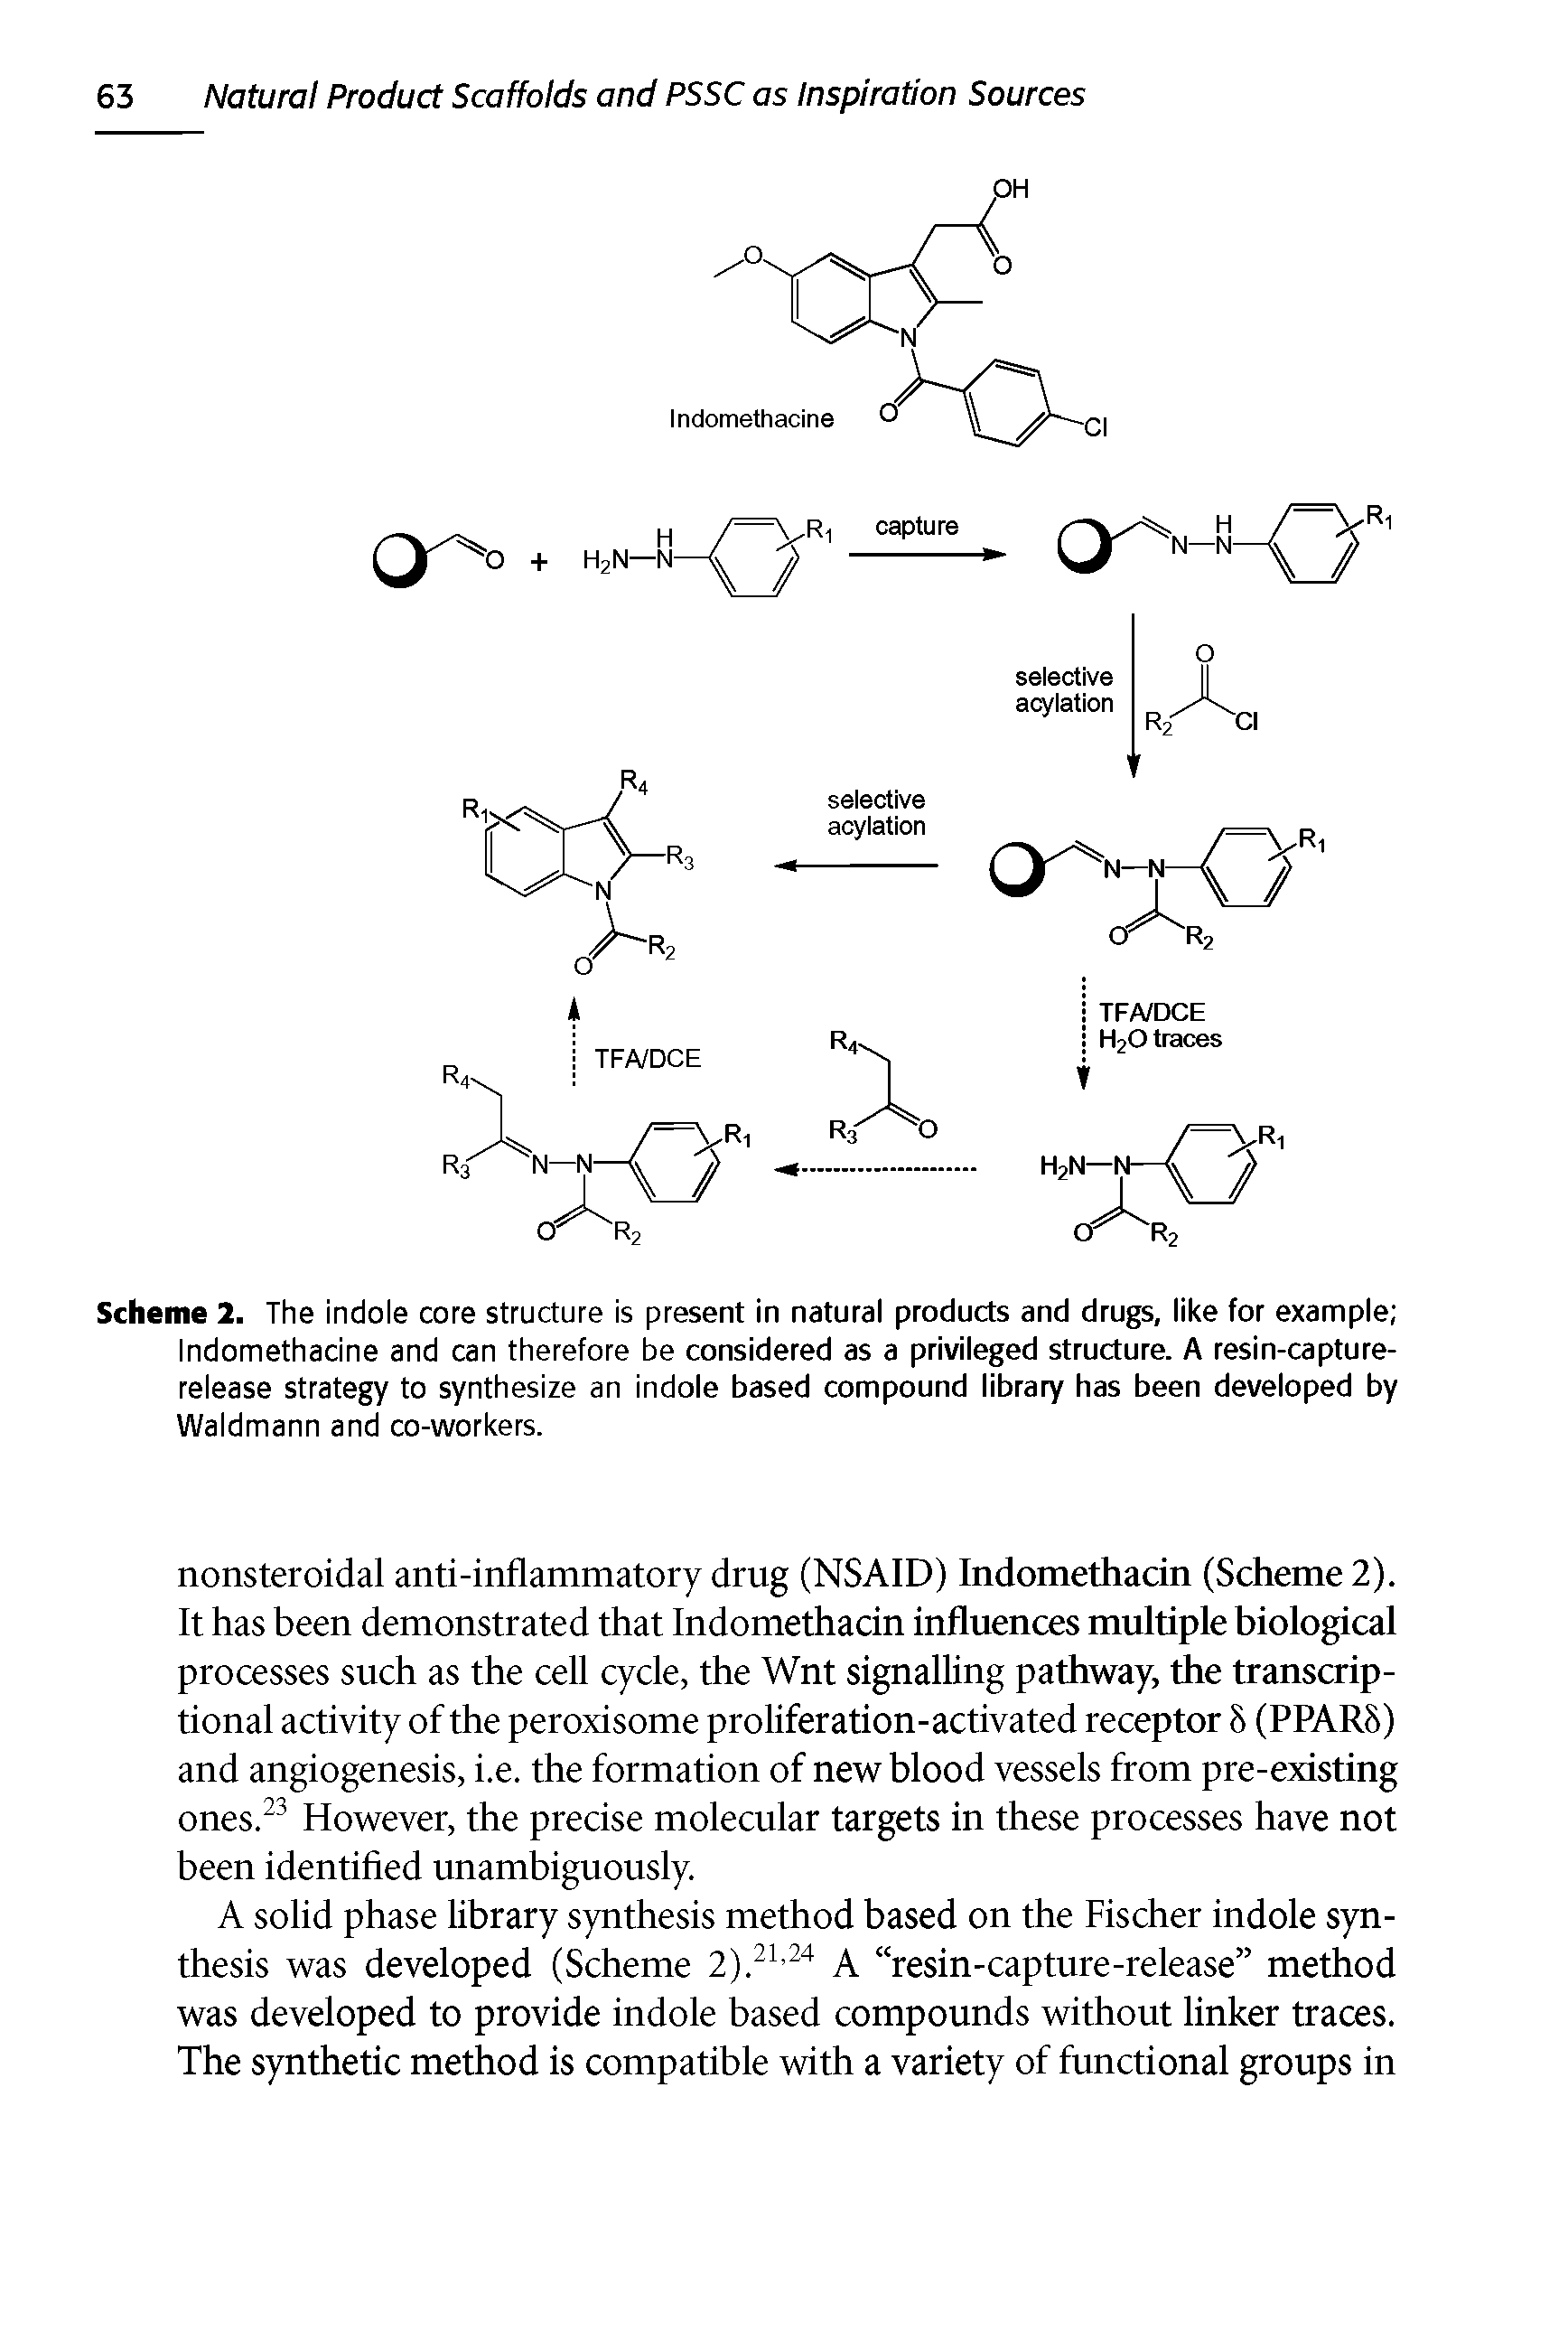 Scheme 2. The indole core structure is present in natural products and drugs, like for example Indomethacine and can therefore be considered as a privileged structure. A resin-capture-release strategy to synthesize an indole based compound library has been developed by Waldmann and co-workers.